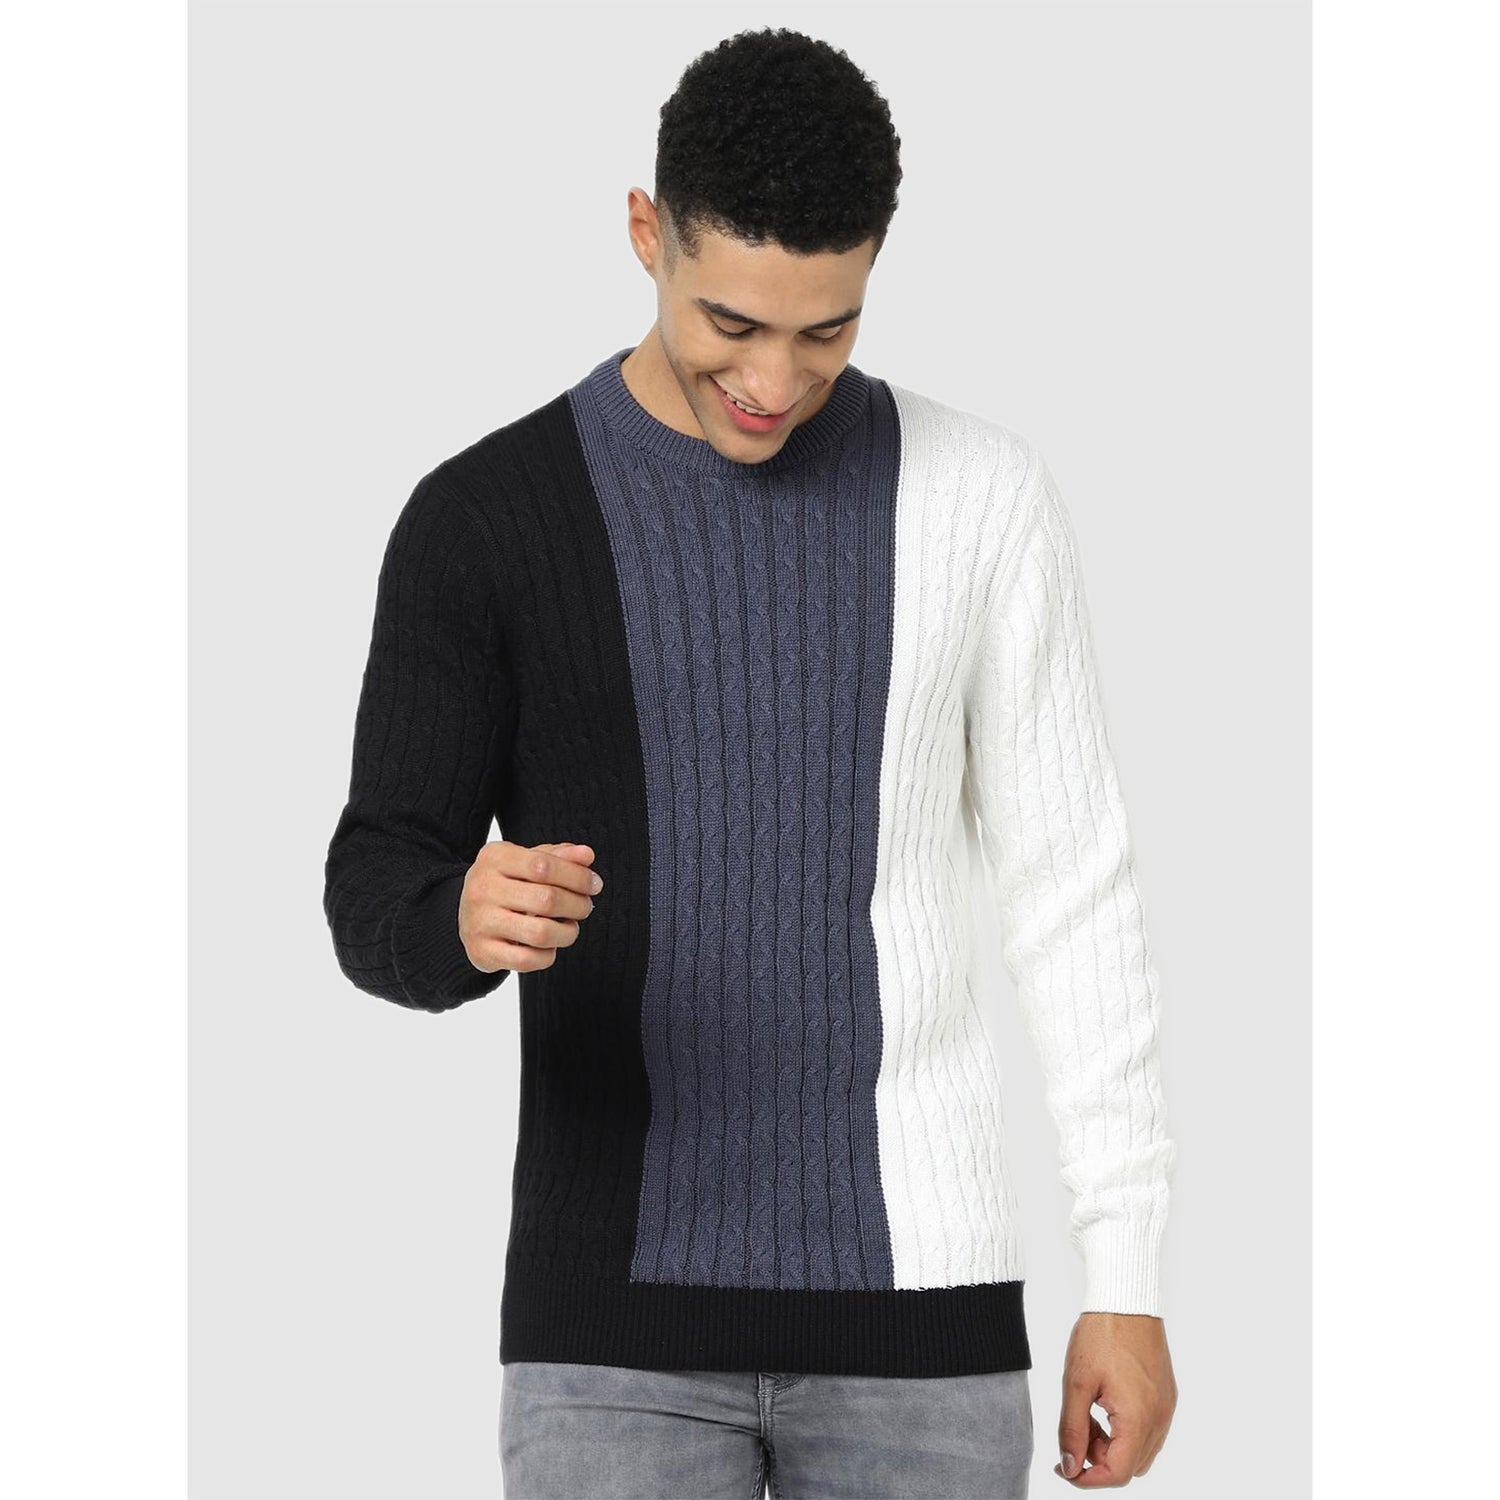 Black and Grey Striped Cotton Pullover Sweater (CECABLE)